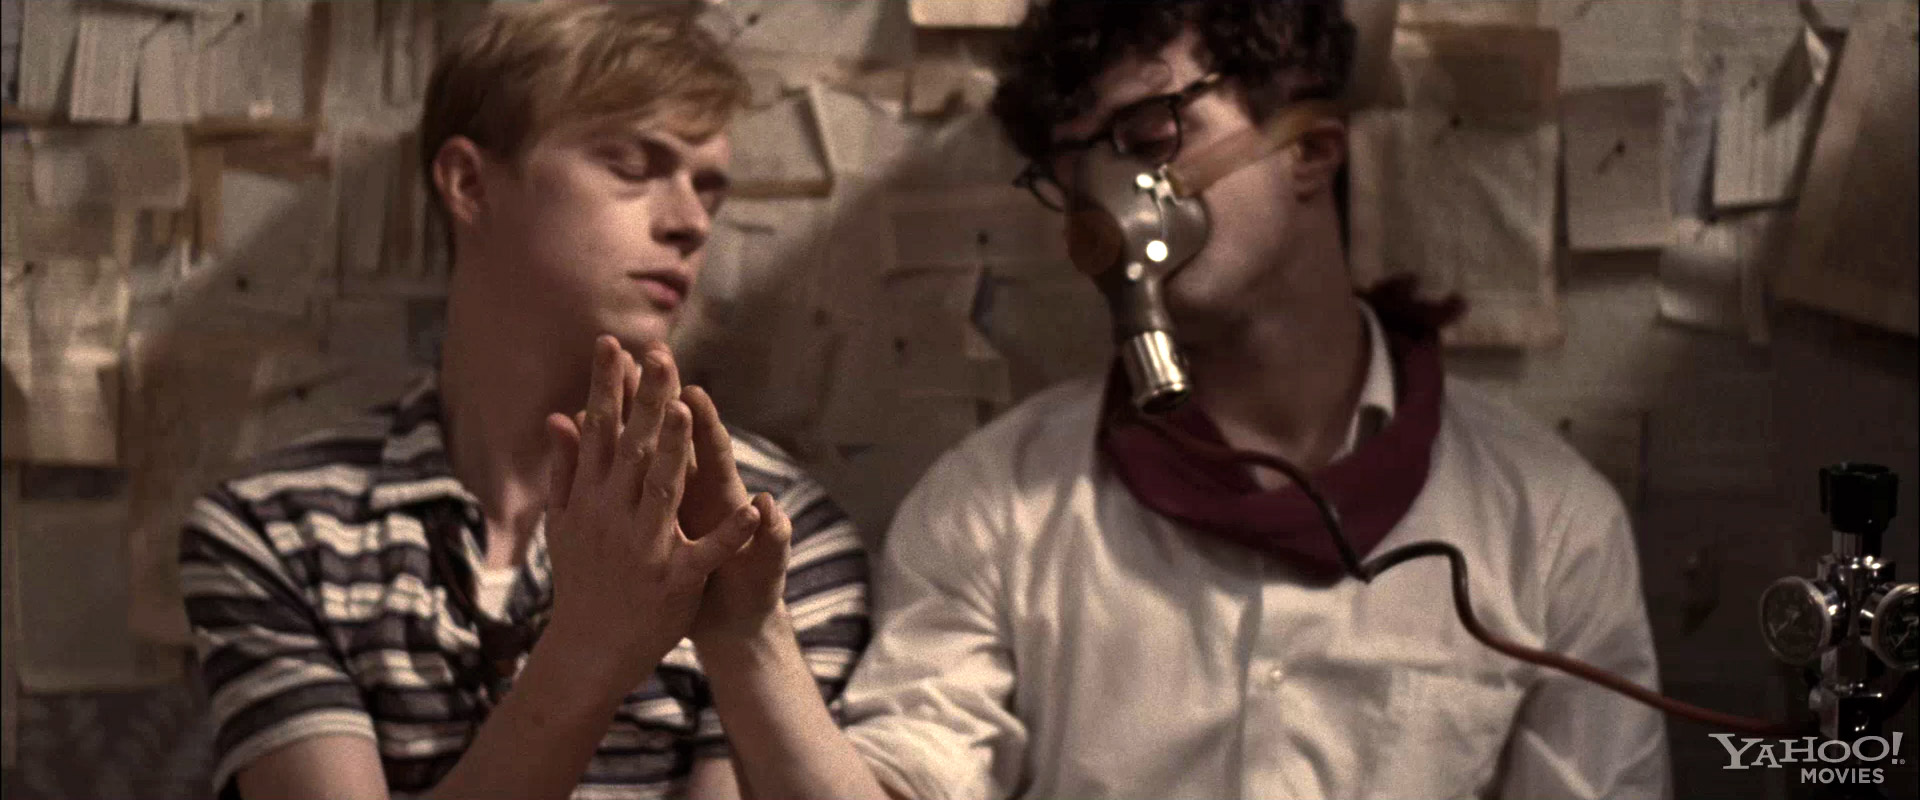 trailer-for-kill-your-darlings-with-daniel-radcliffe-14.jpg